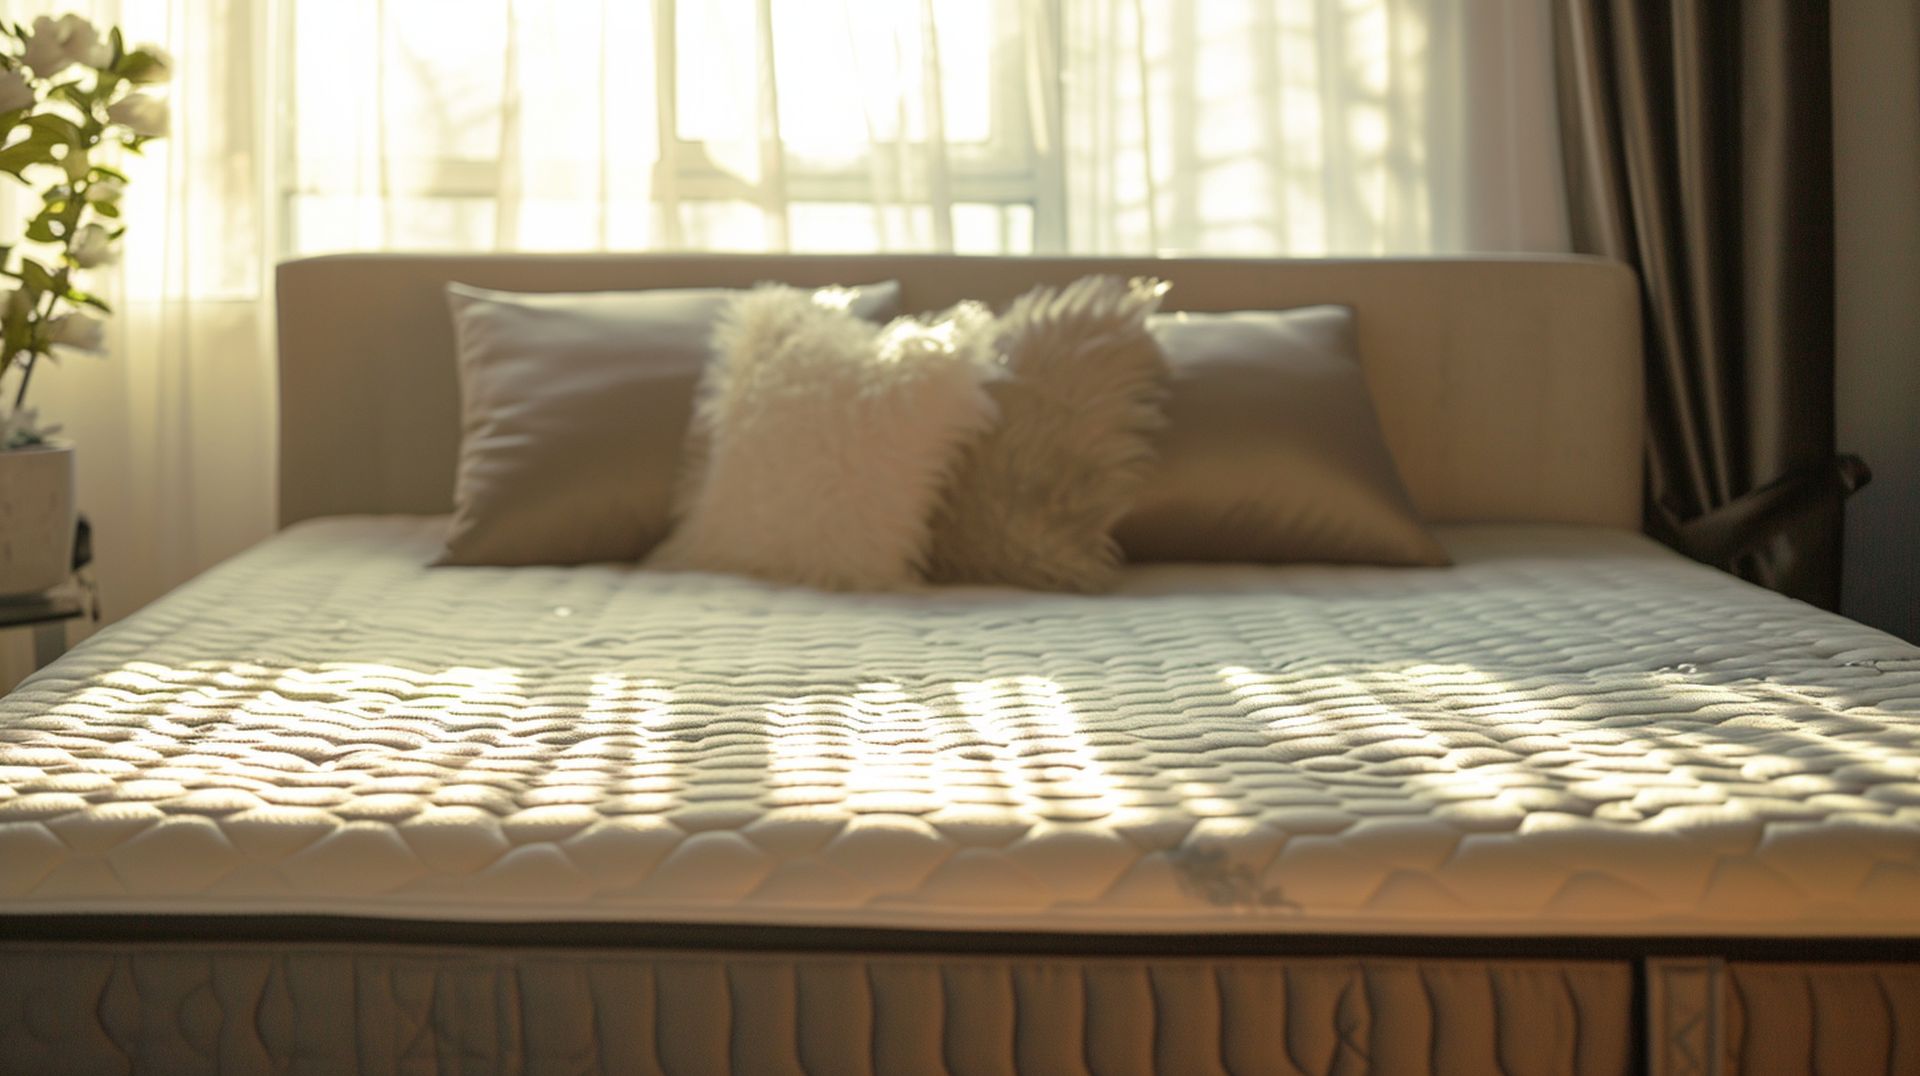 Local Turlock mattress stores have the best prices, sales, and deals if you're looking for a new mattress in Turlock